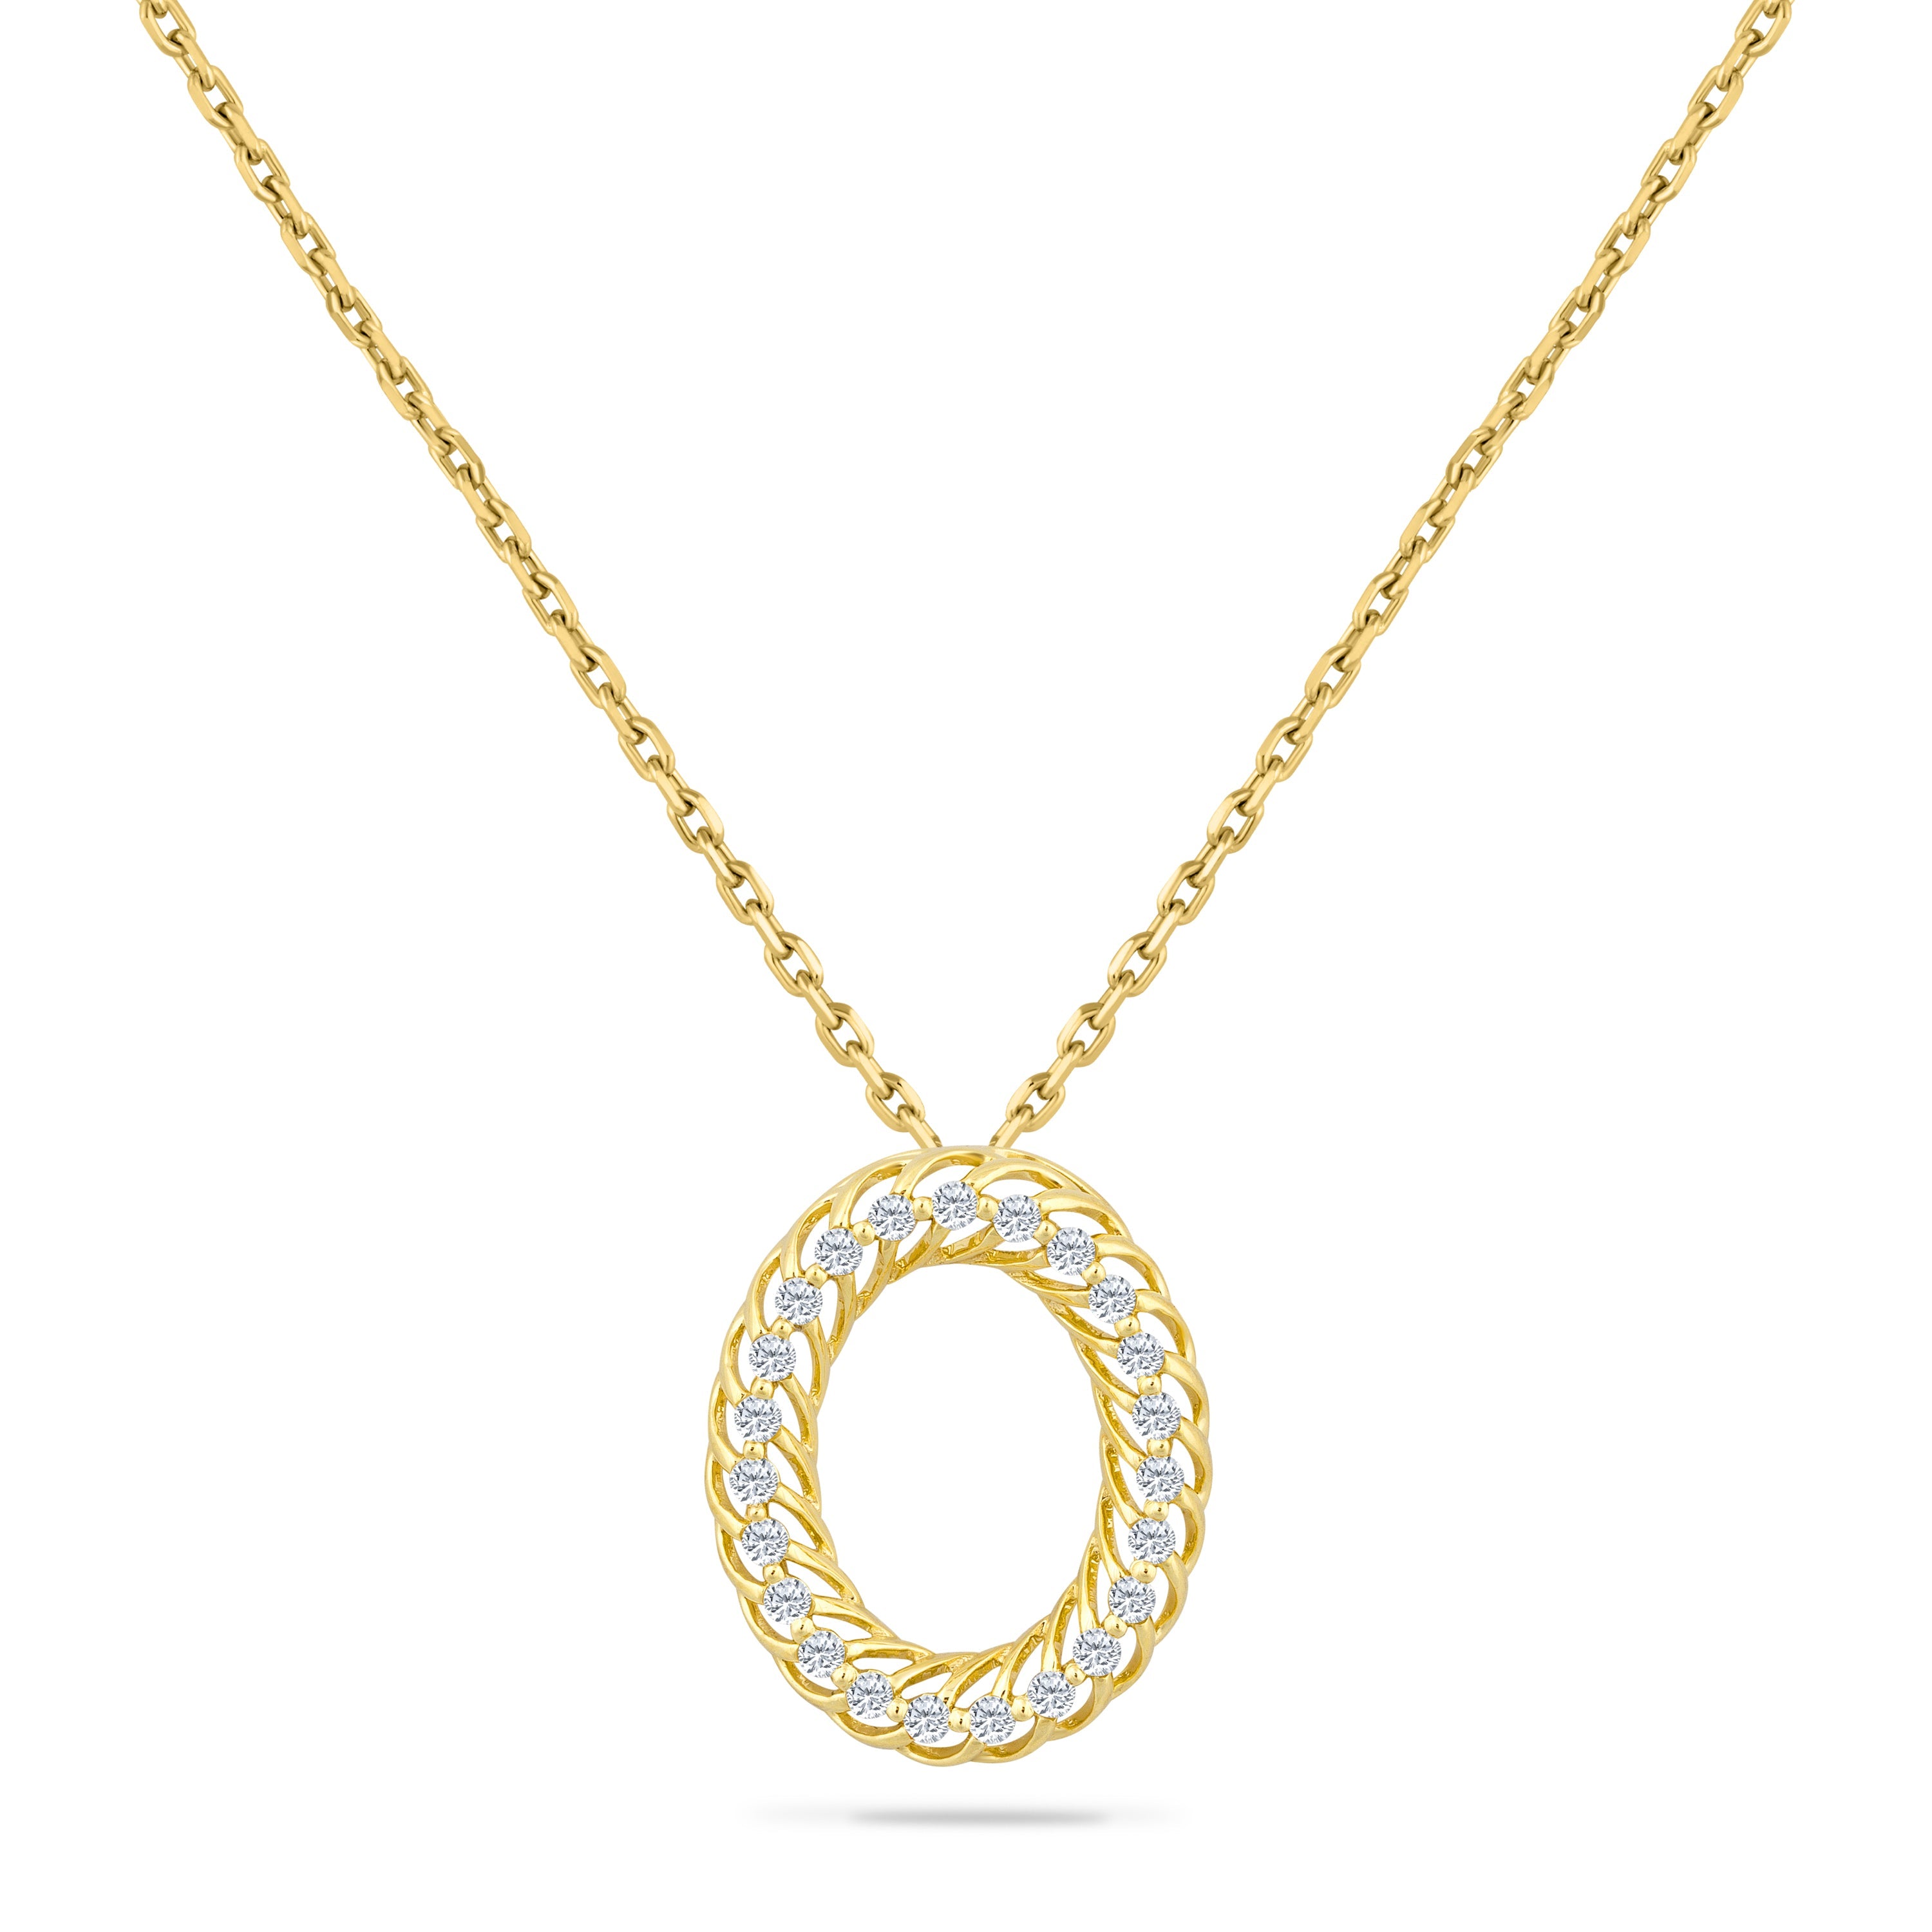 14K OVAL PENDANT WITH 23 DIAMONDS 0.25CT ON 18 INCHES CURB CHAIN